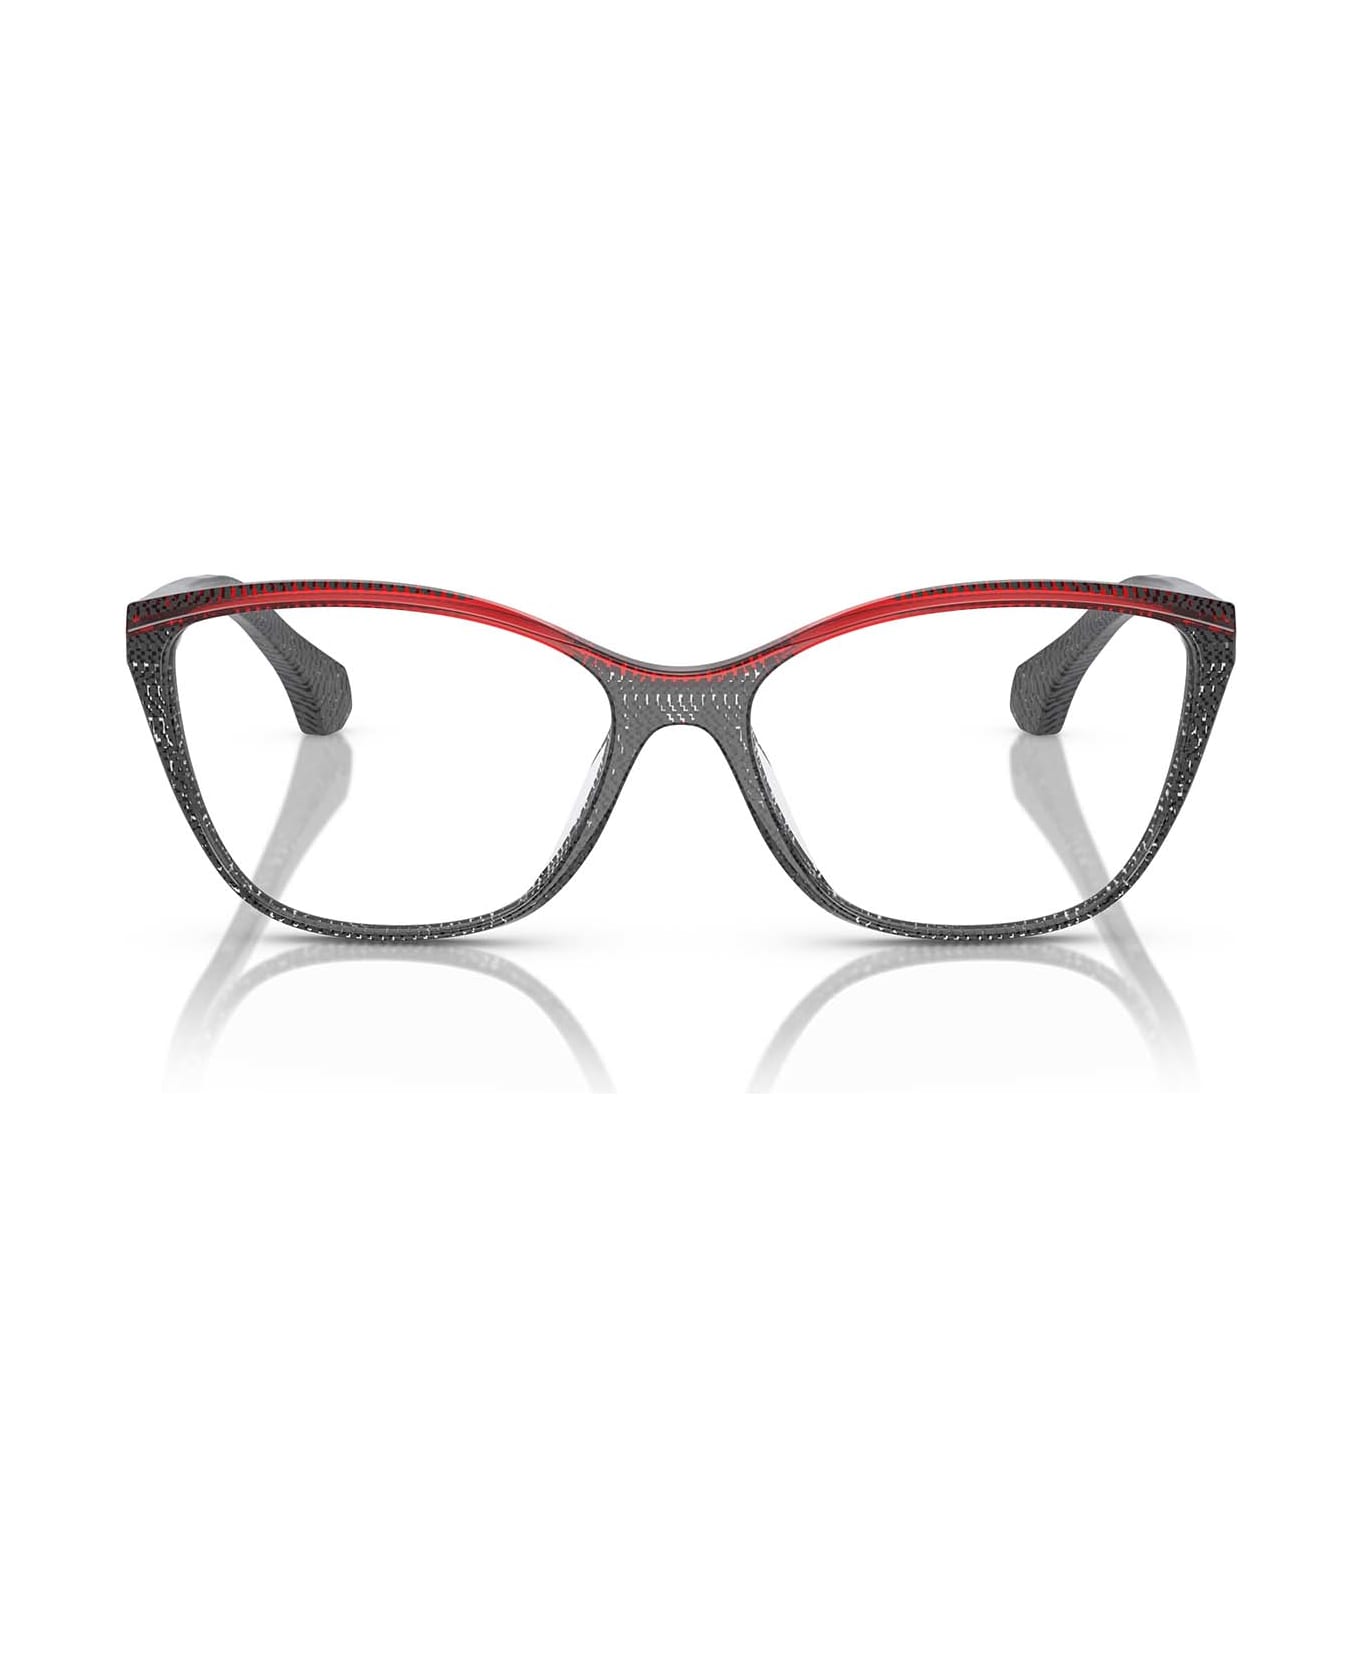 Alain Mikli A03502 New Pointillee Grey/red Glasses - New Pointillee Grey/Red